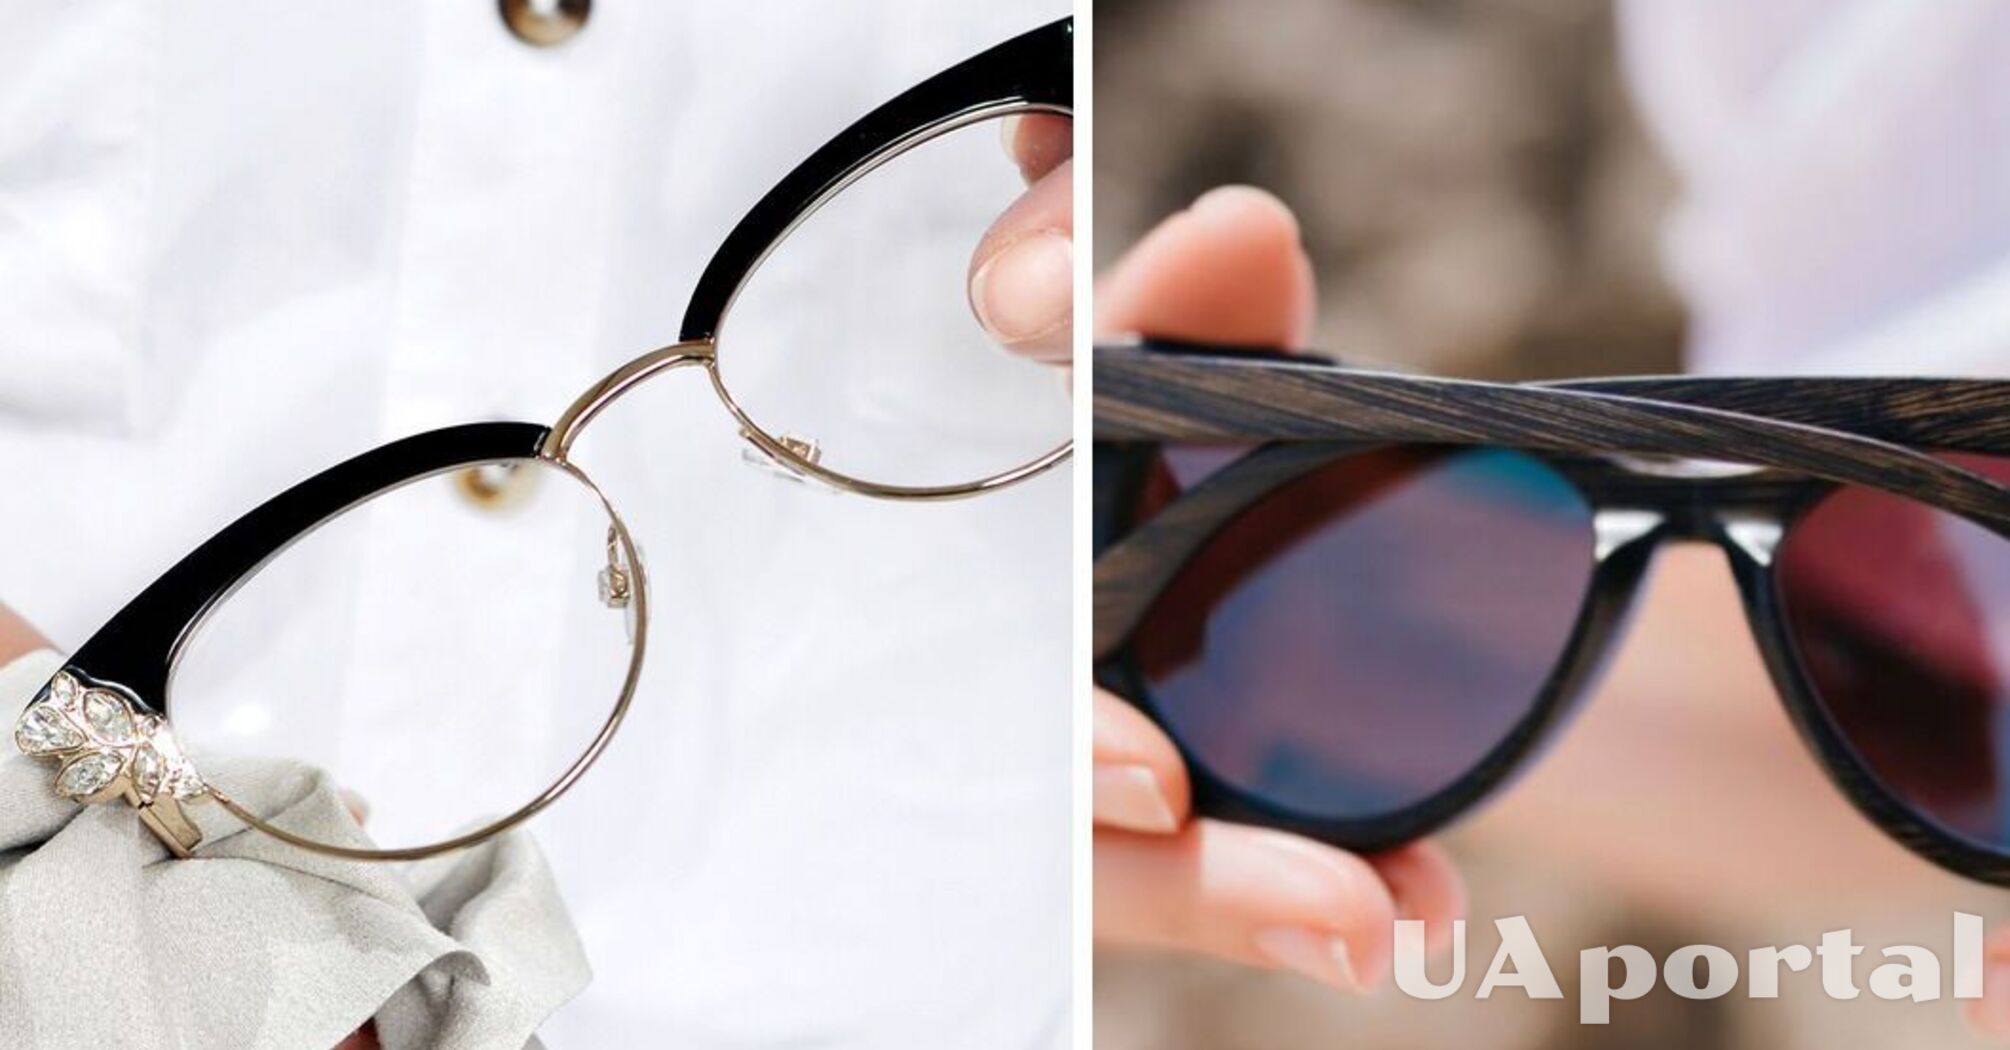 How to remove scratches on glasses - a life hack with toothpaste